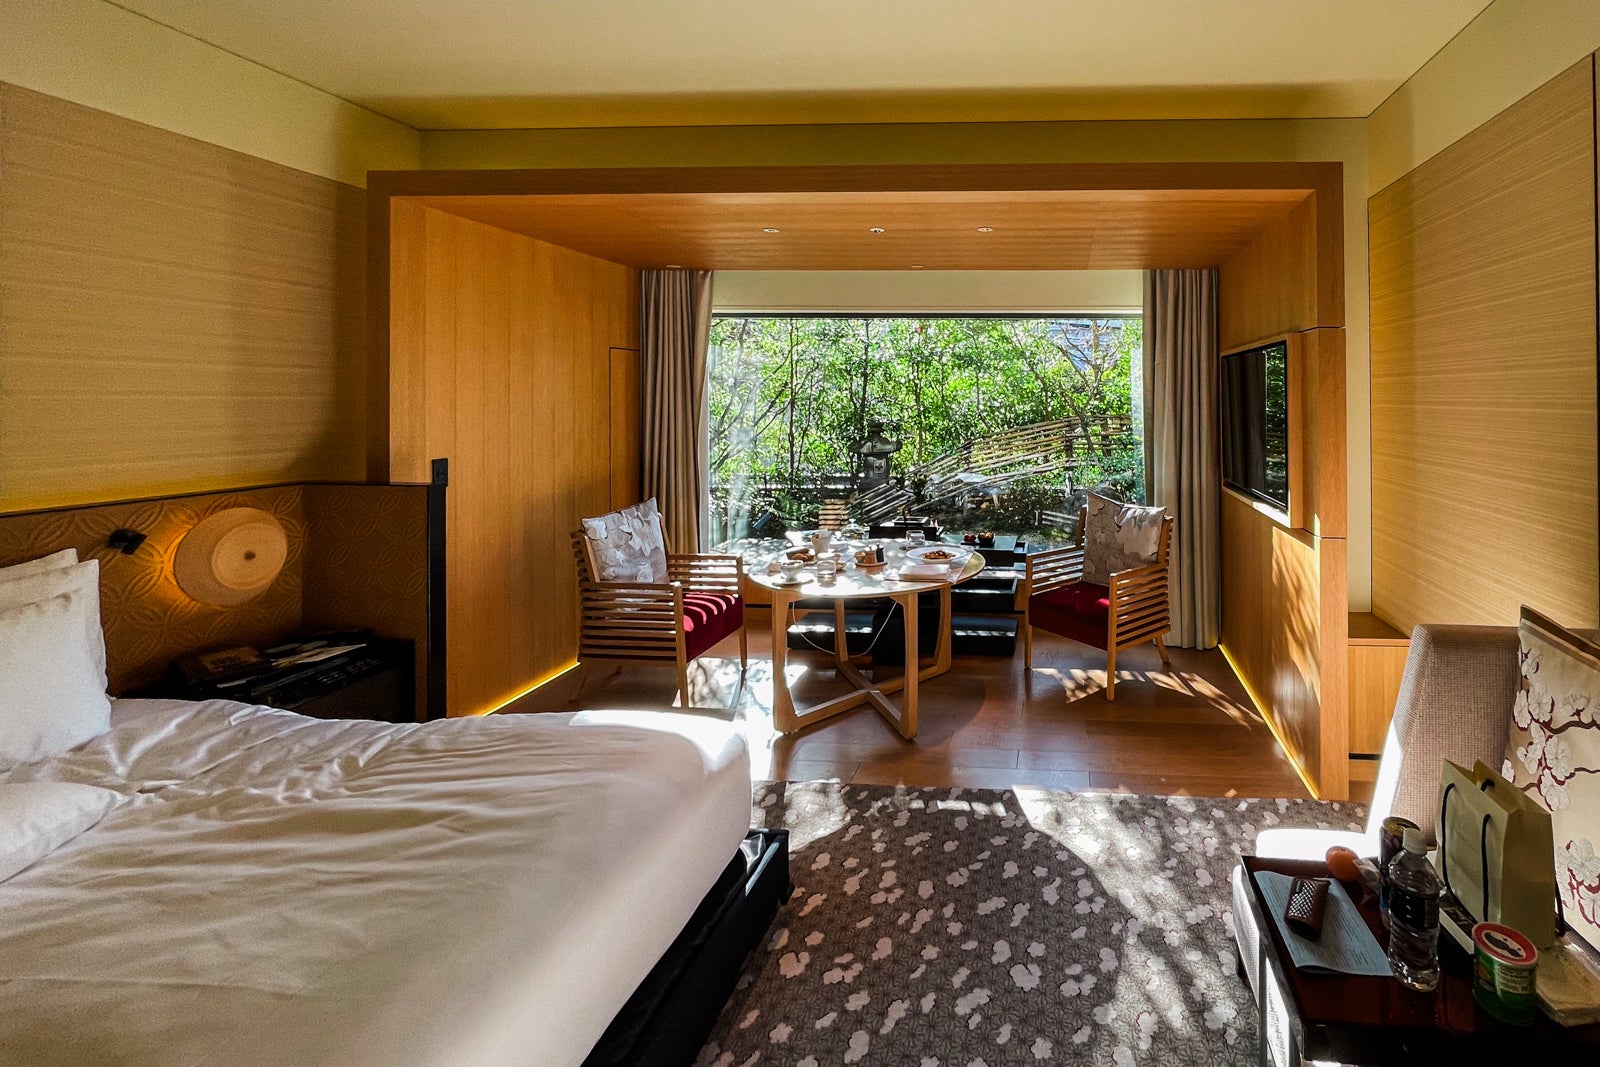 Garden-view room at The Ritz-Carlton, Kyoto in Japan